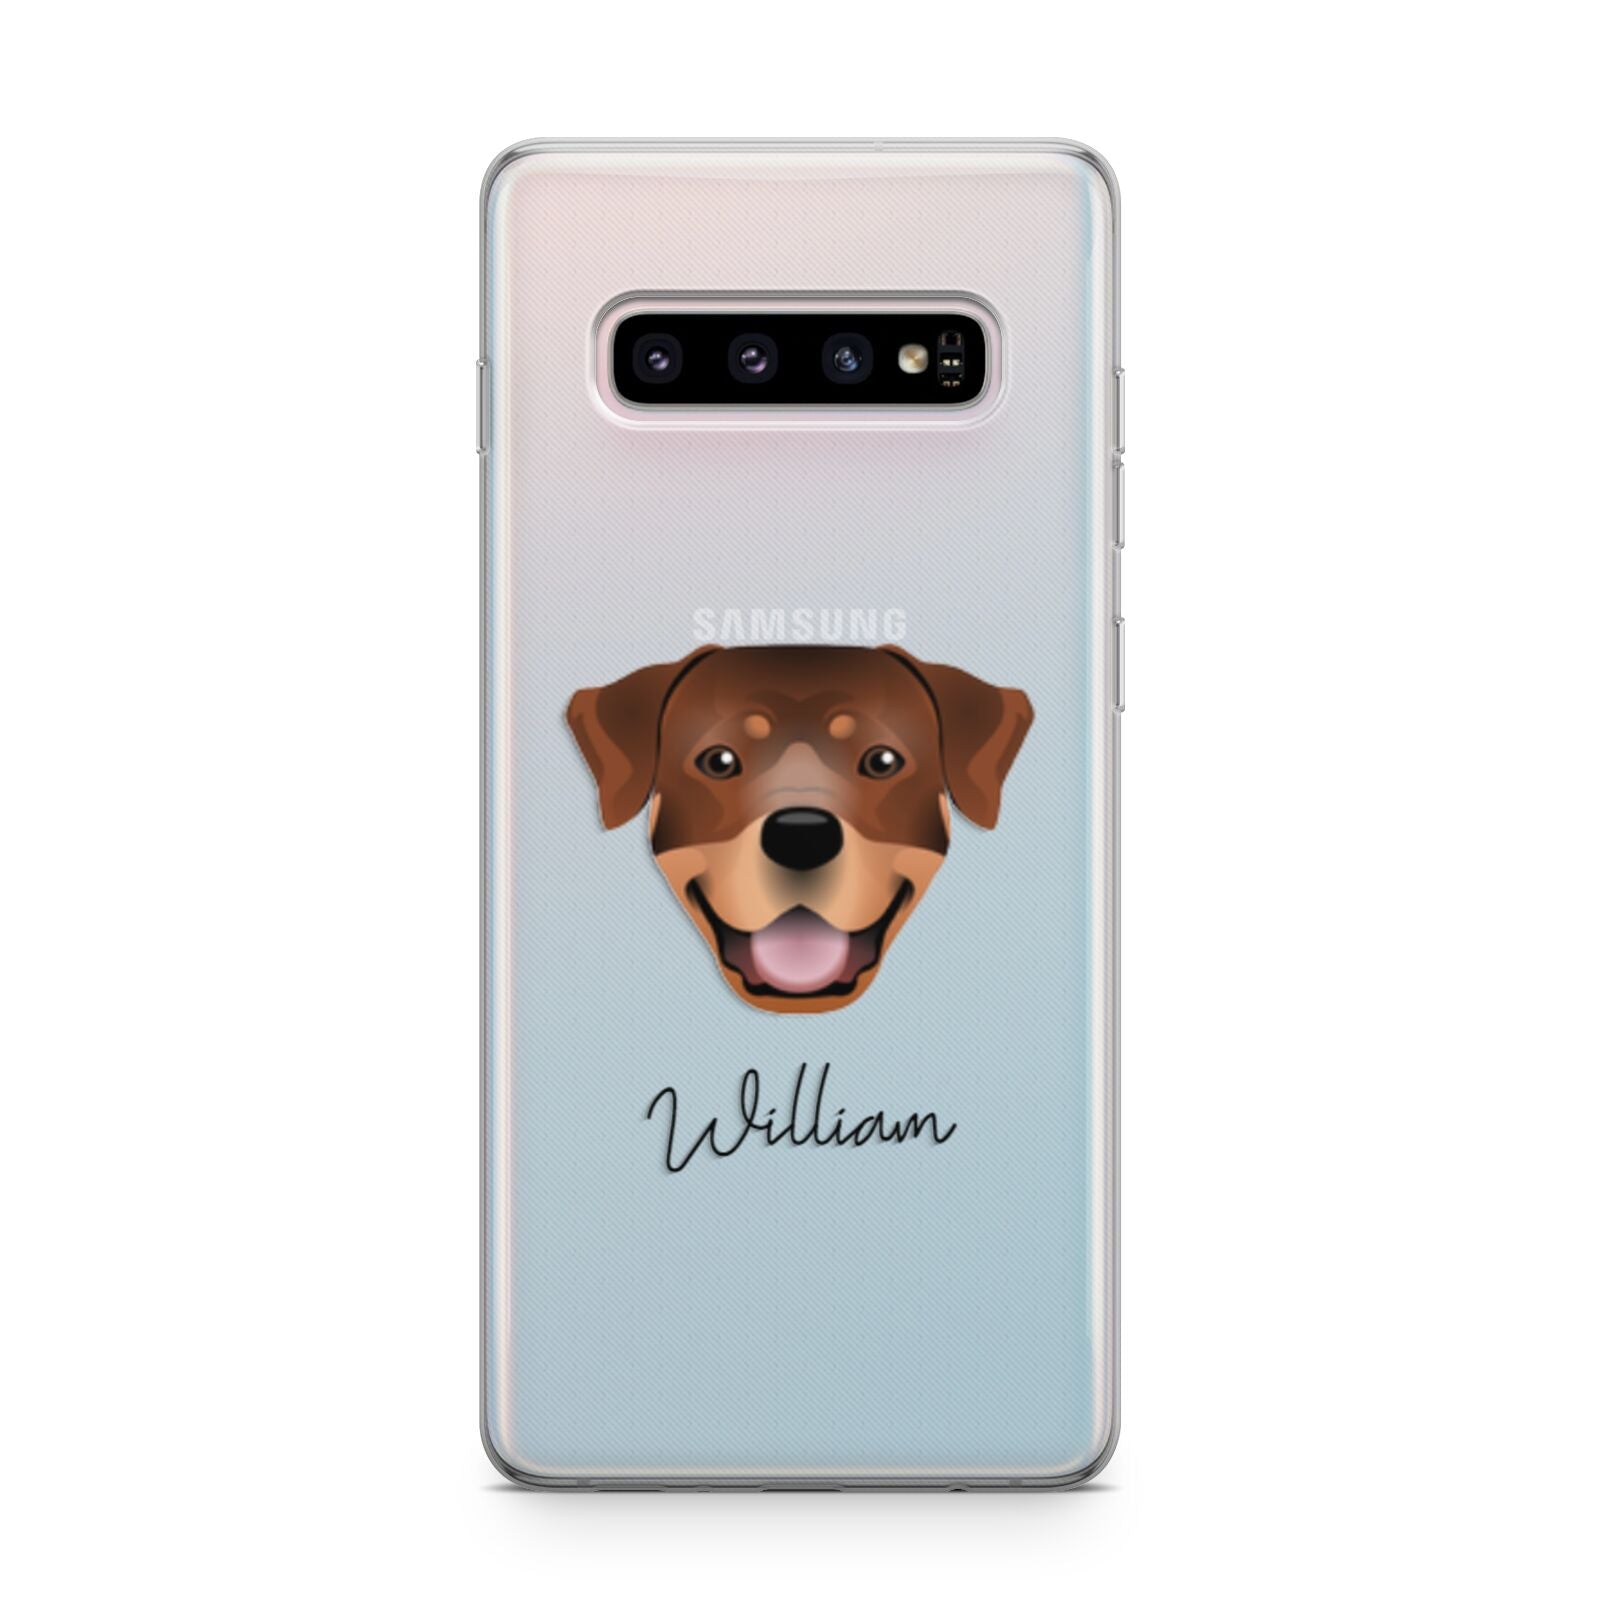 Rottweiler Personalised Samsung Galaxy S10 Plus Case